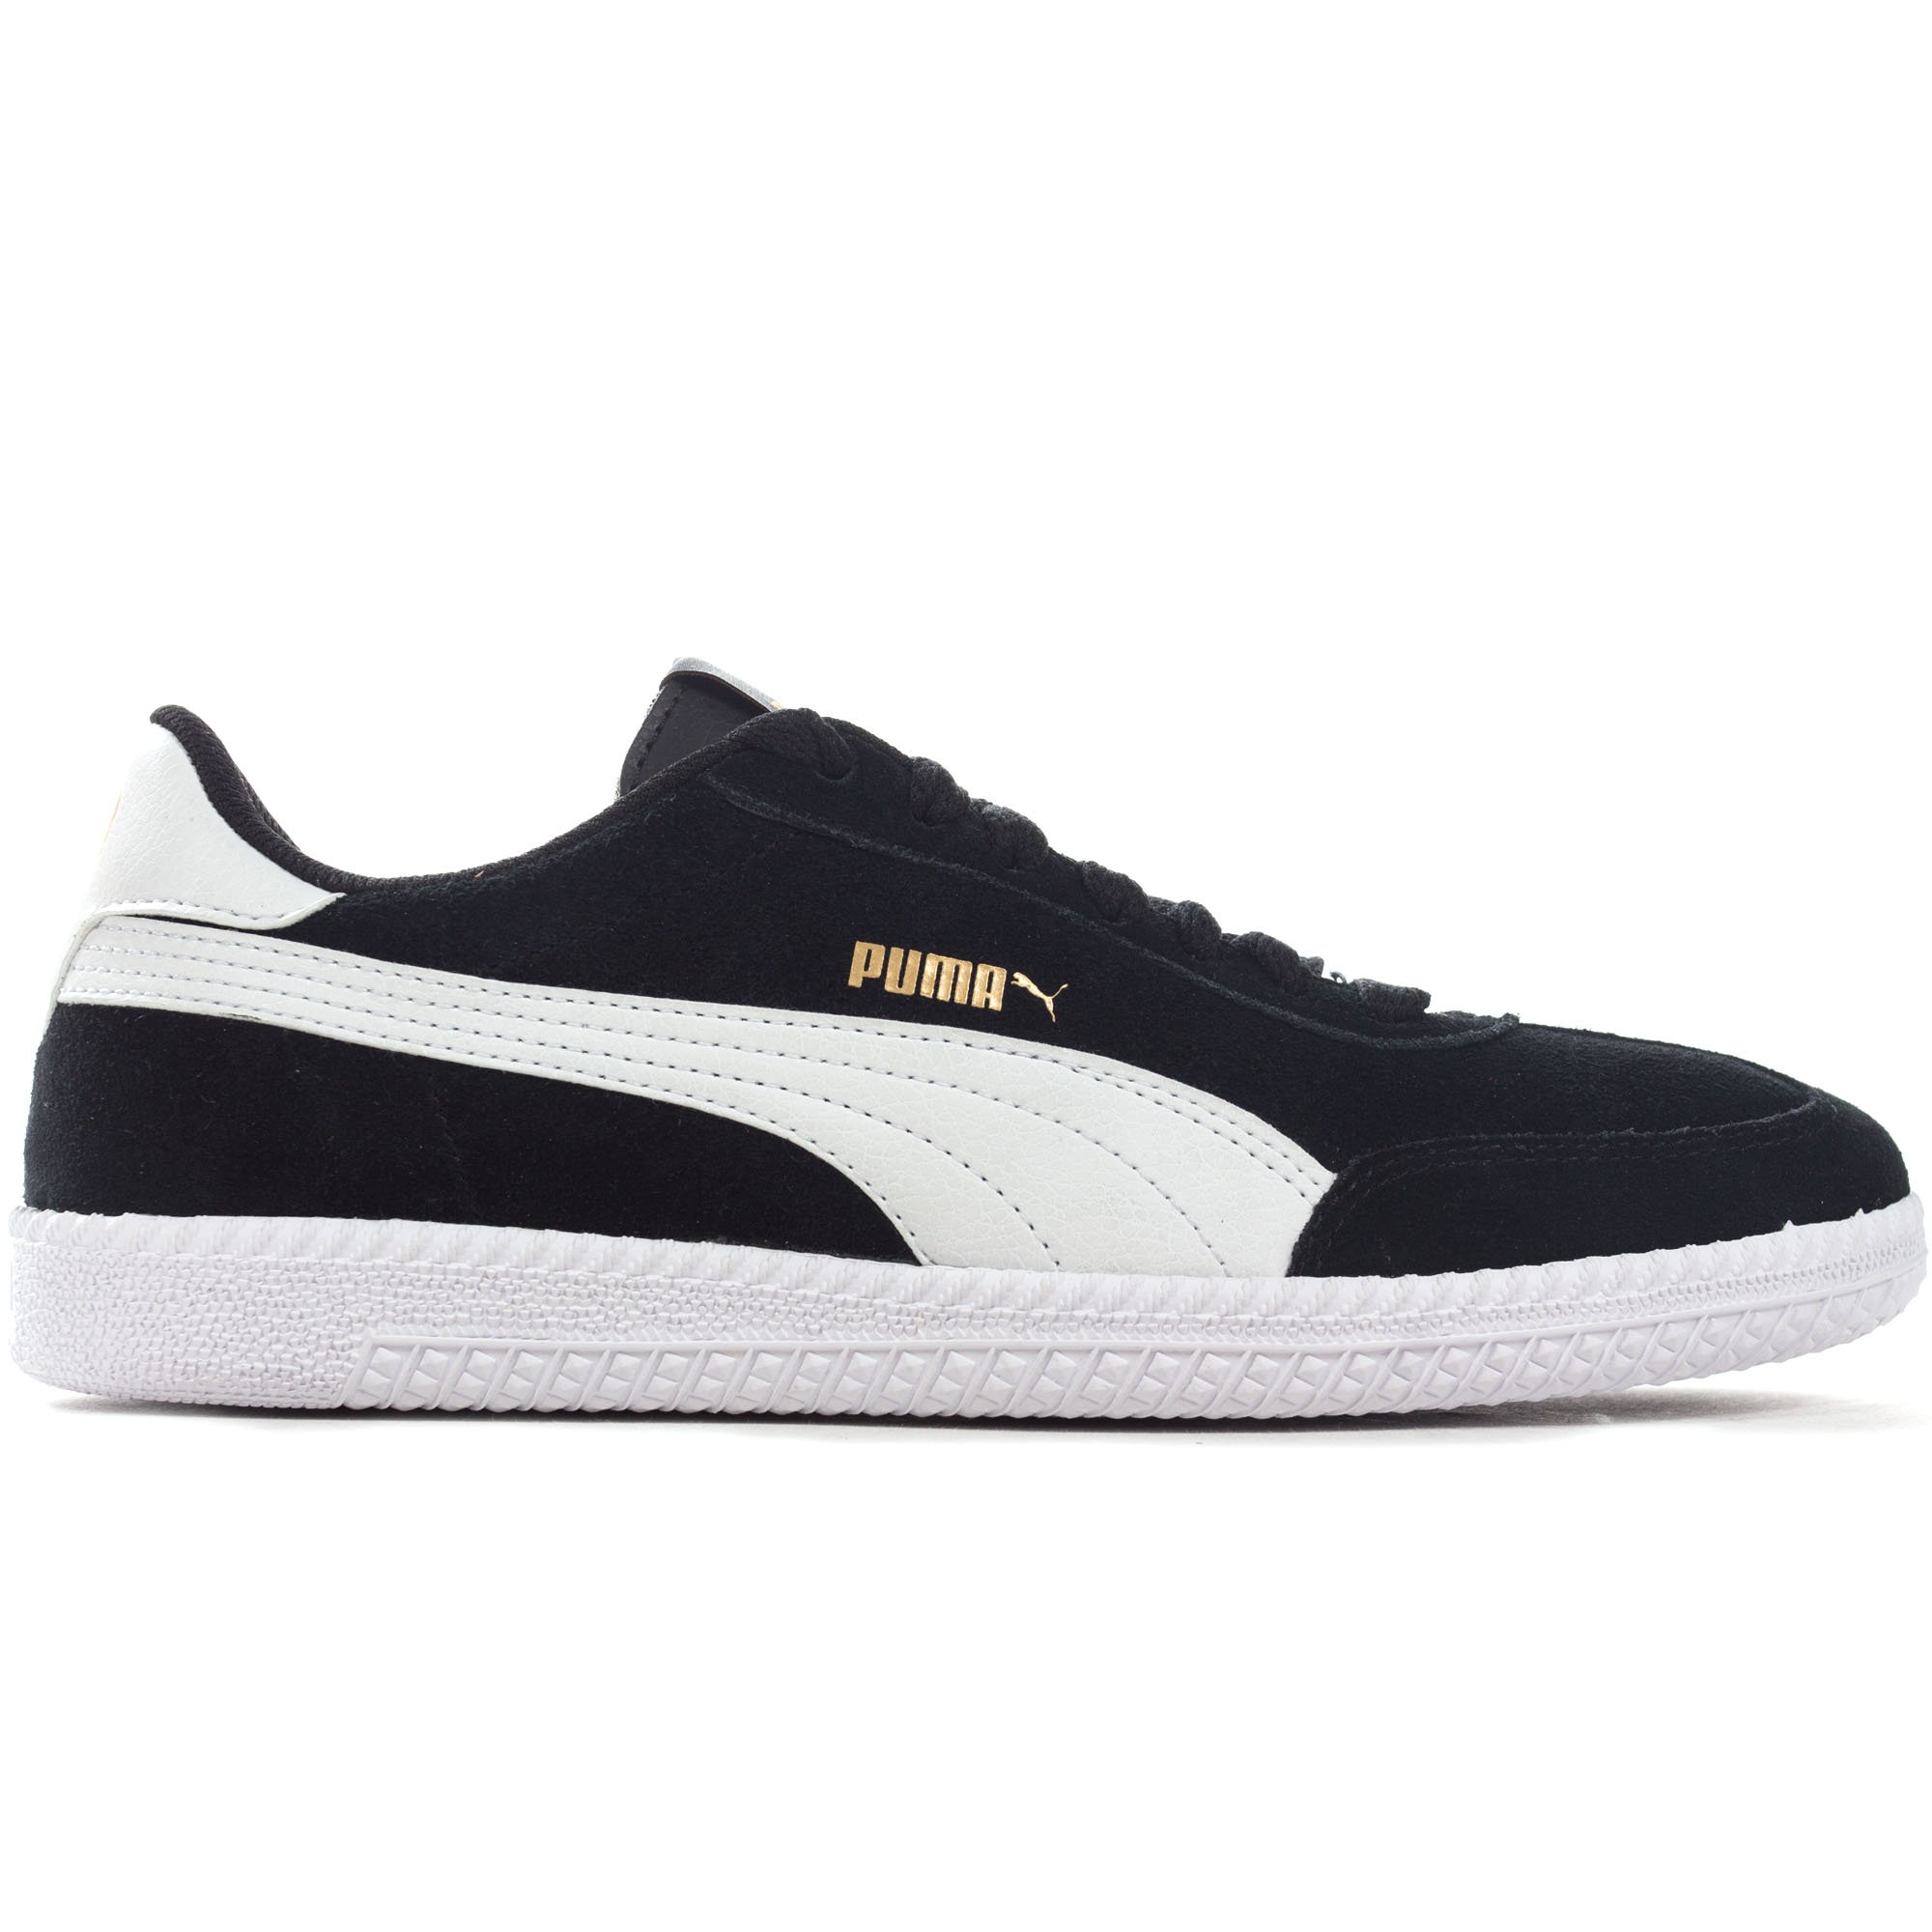 astro cup suede trainers